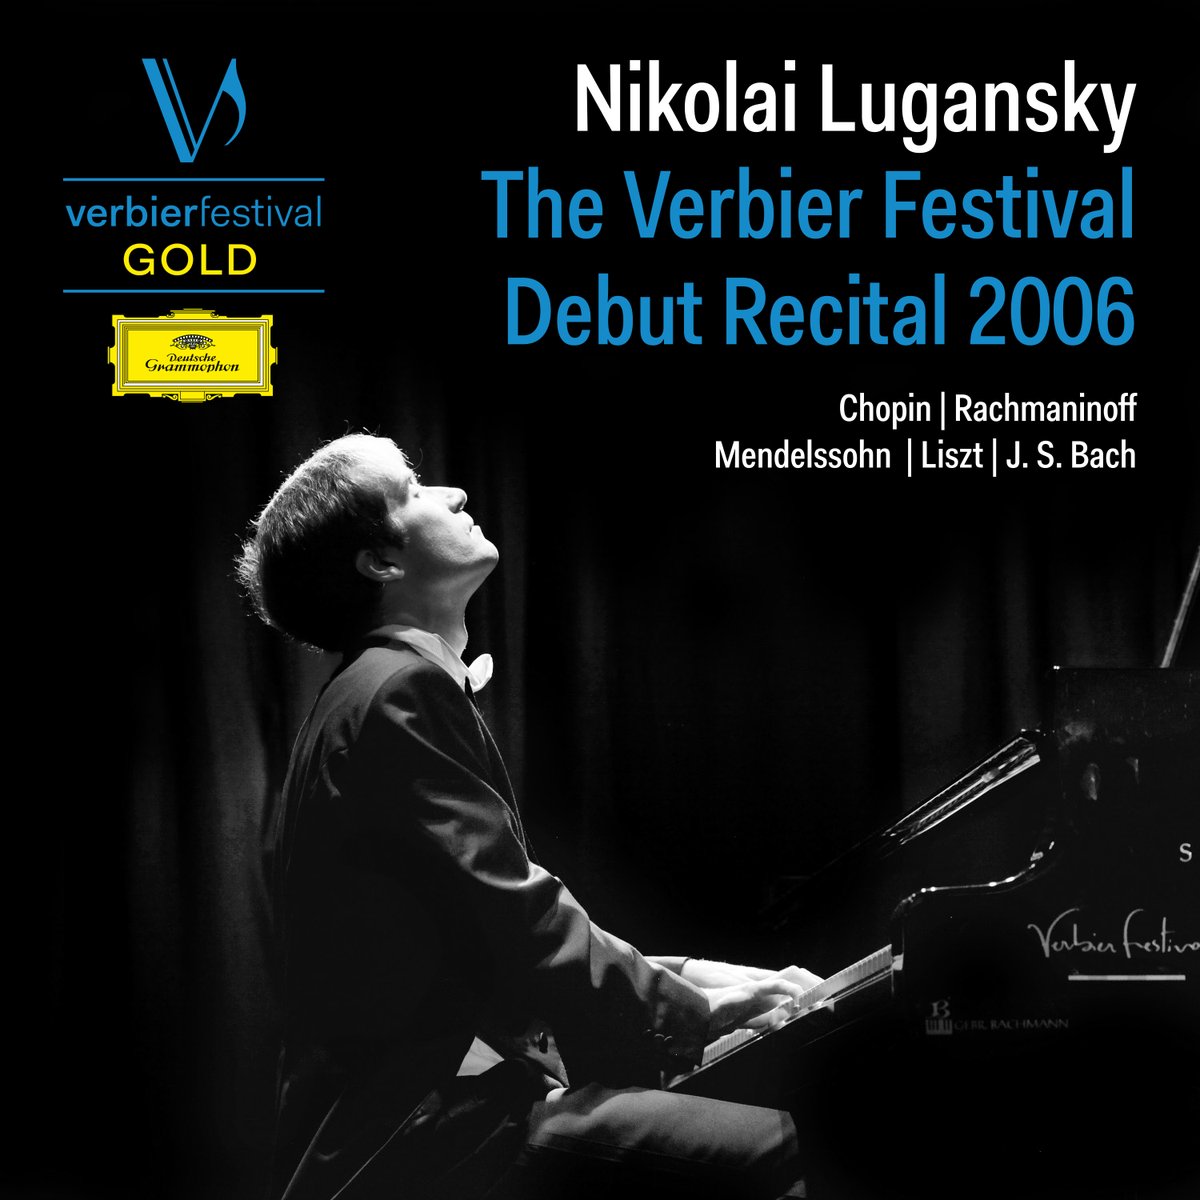 Our next @VerbierFestival Gold album features the renowned pianist Nikolai Lugansky, who made his historic debut at the festival in 2006. Ahead of the album release, listen to a pre-release track. 🎧 → dgt.link/verbier-lugans…